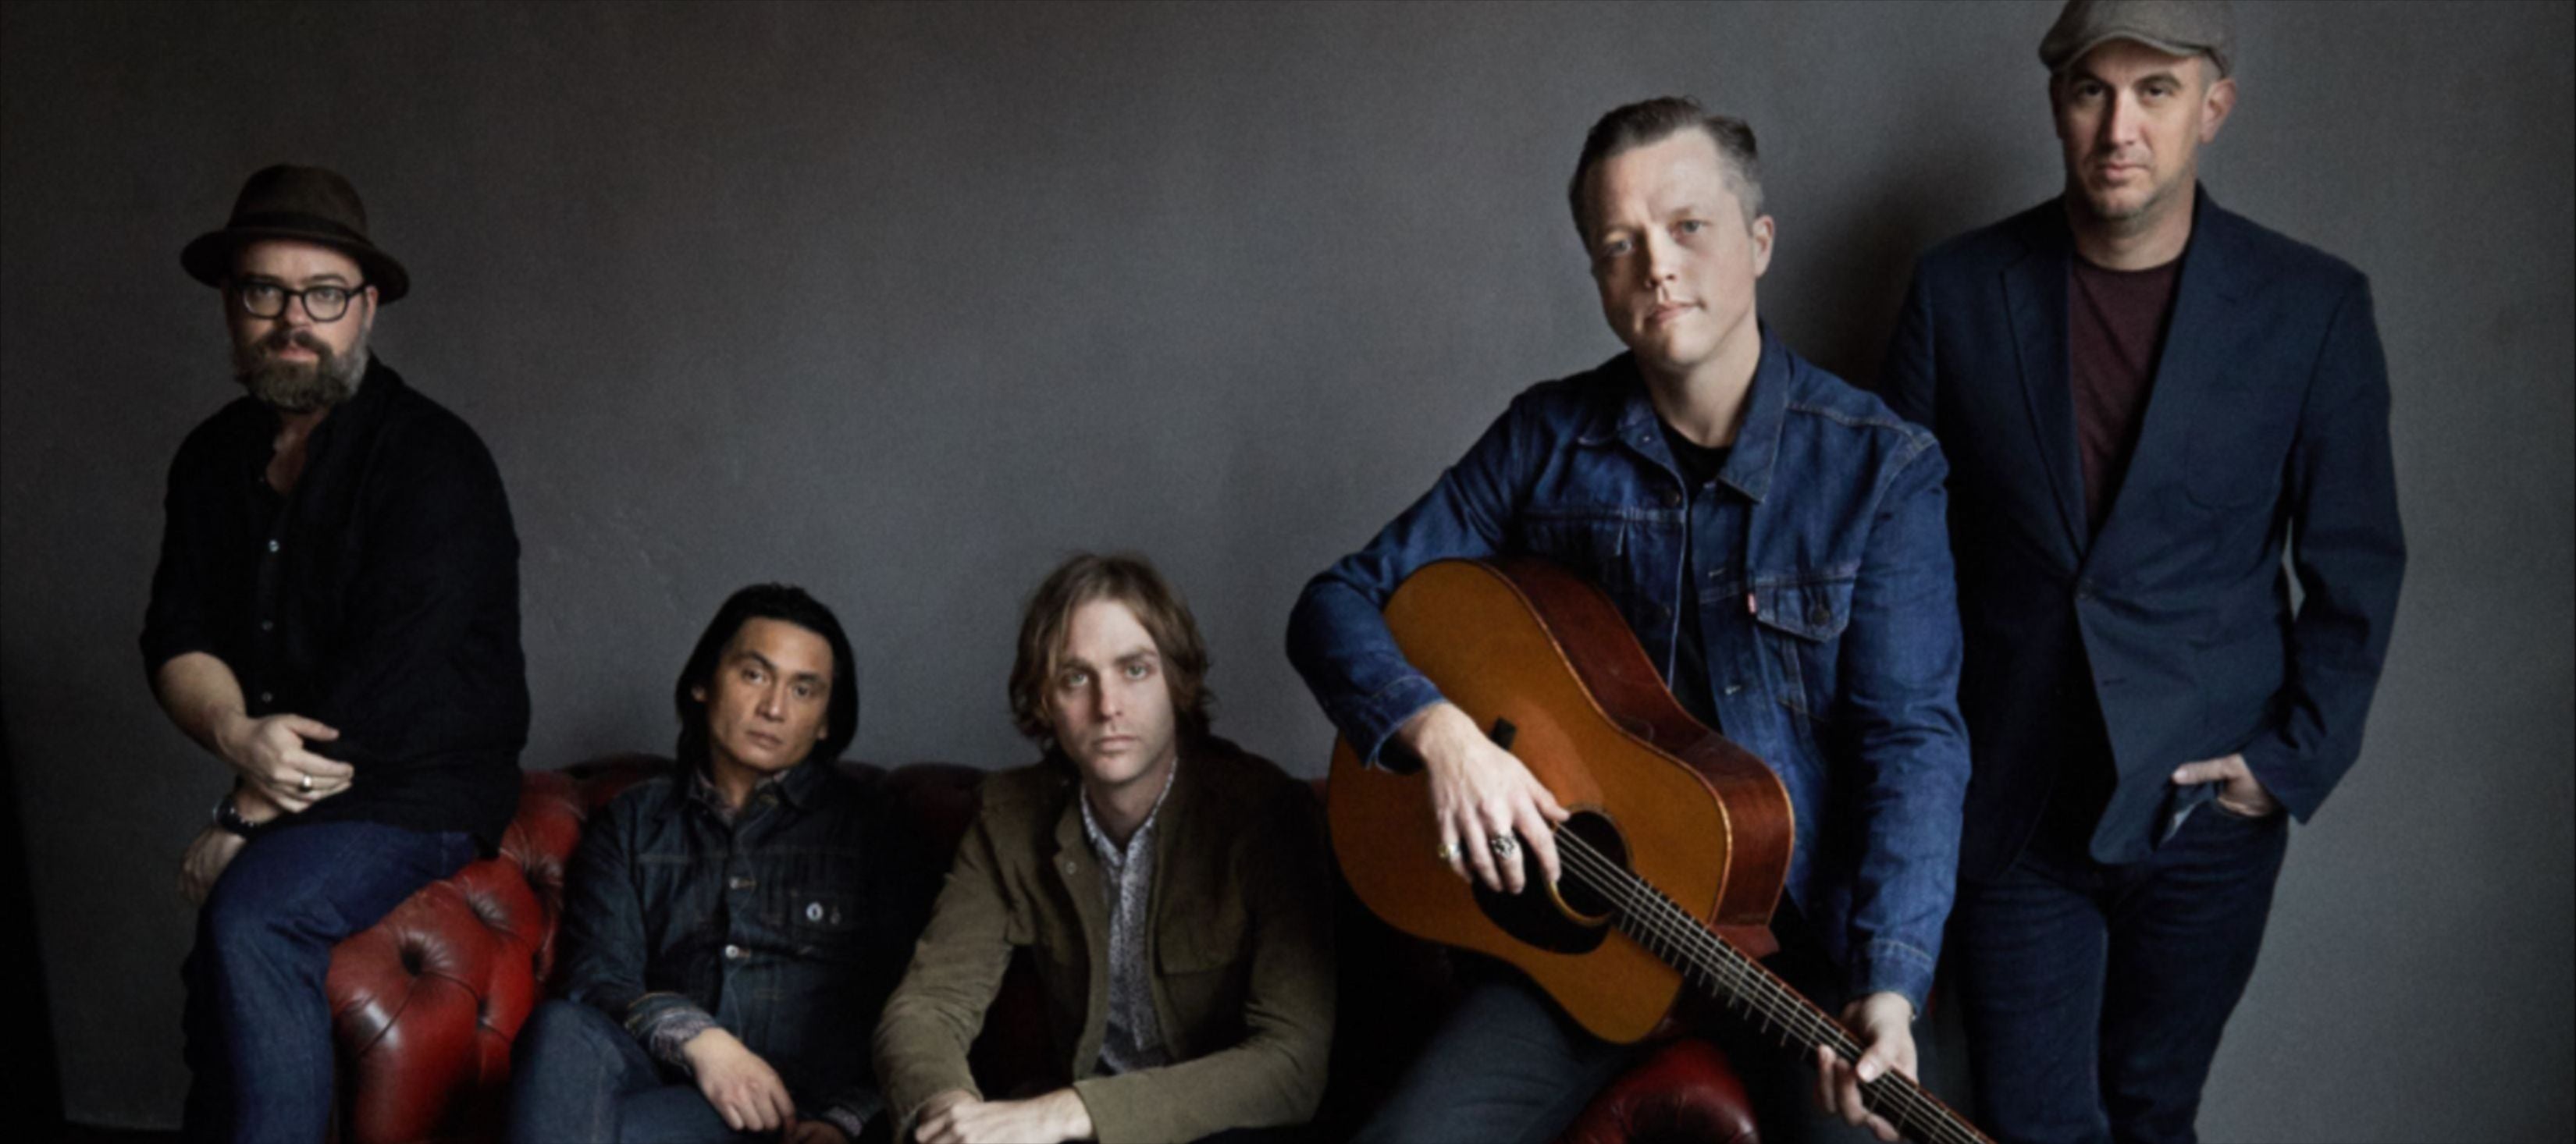 Jason Isbell and the 400 Unit & Father John Misty